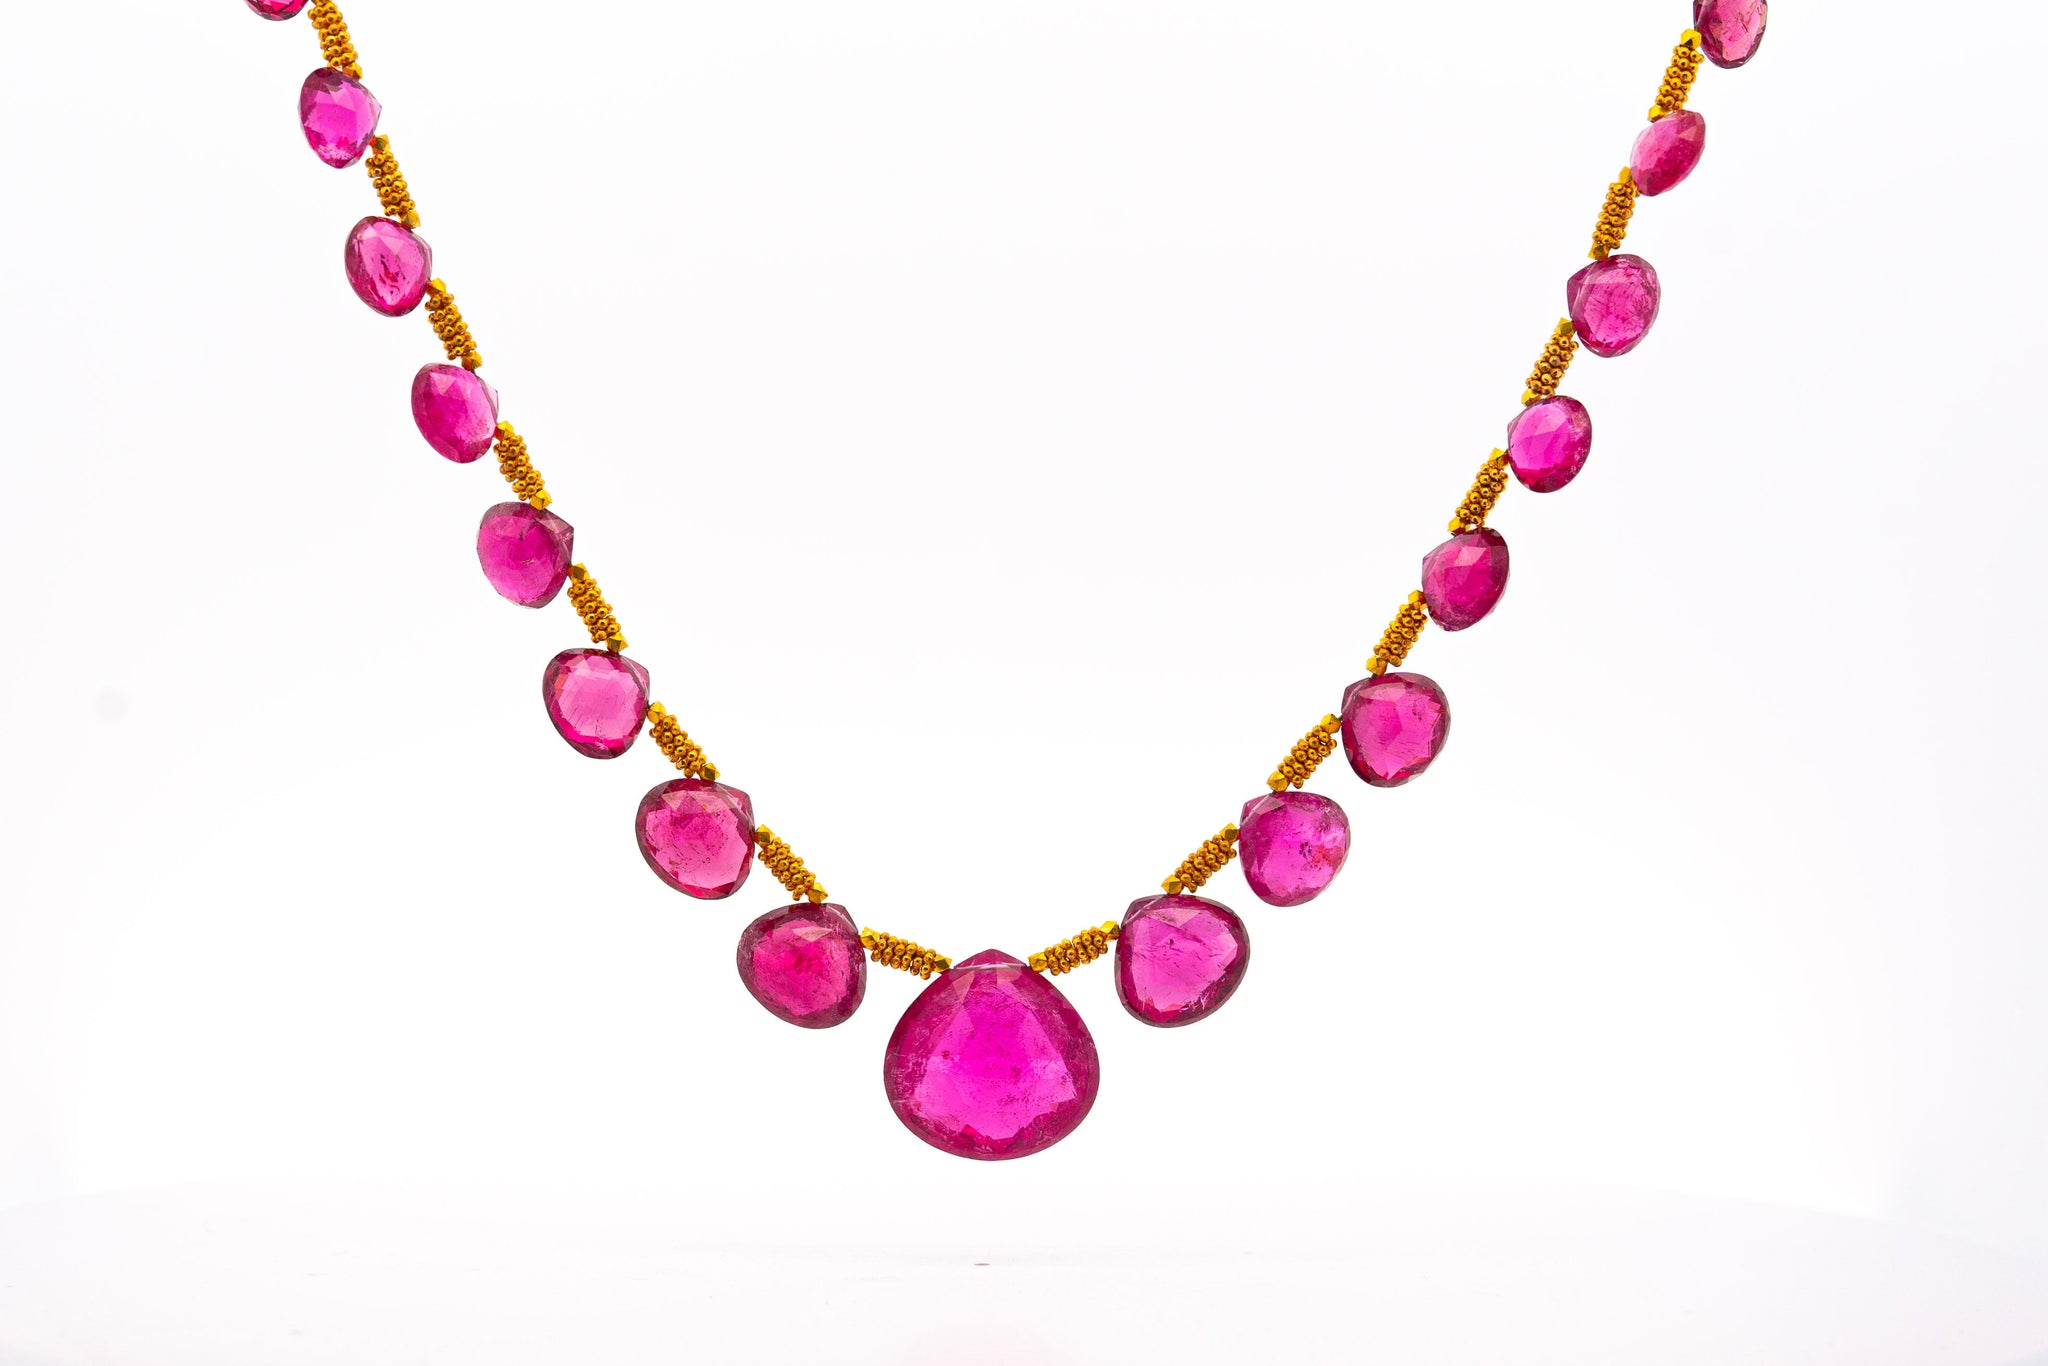 Vintage GIA Certified 120 Carat Pear-Shape Pink Rubellite Tourmaline Necklace in 22k Yellow Gold